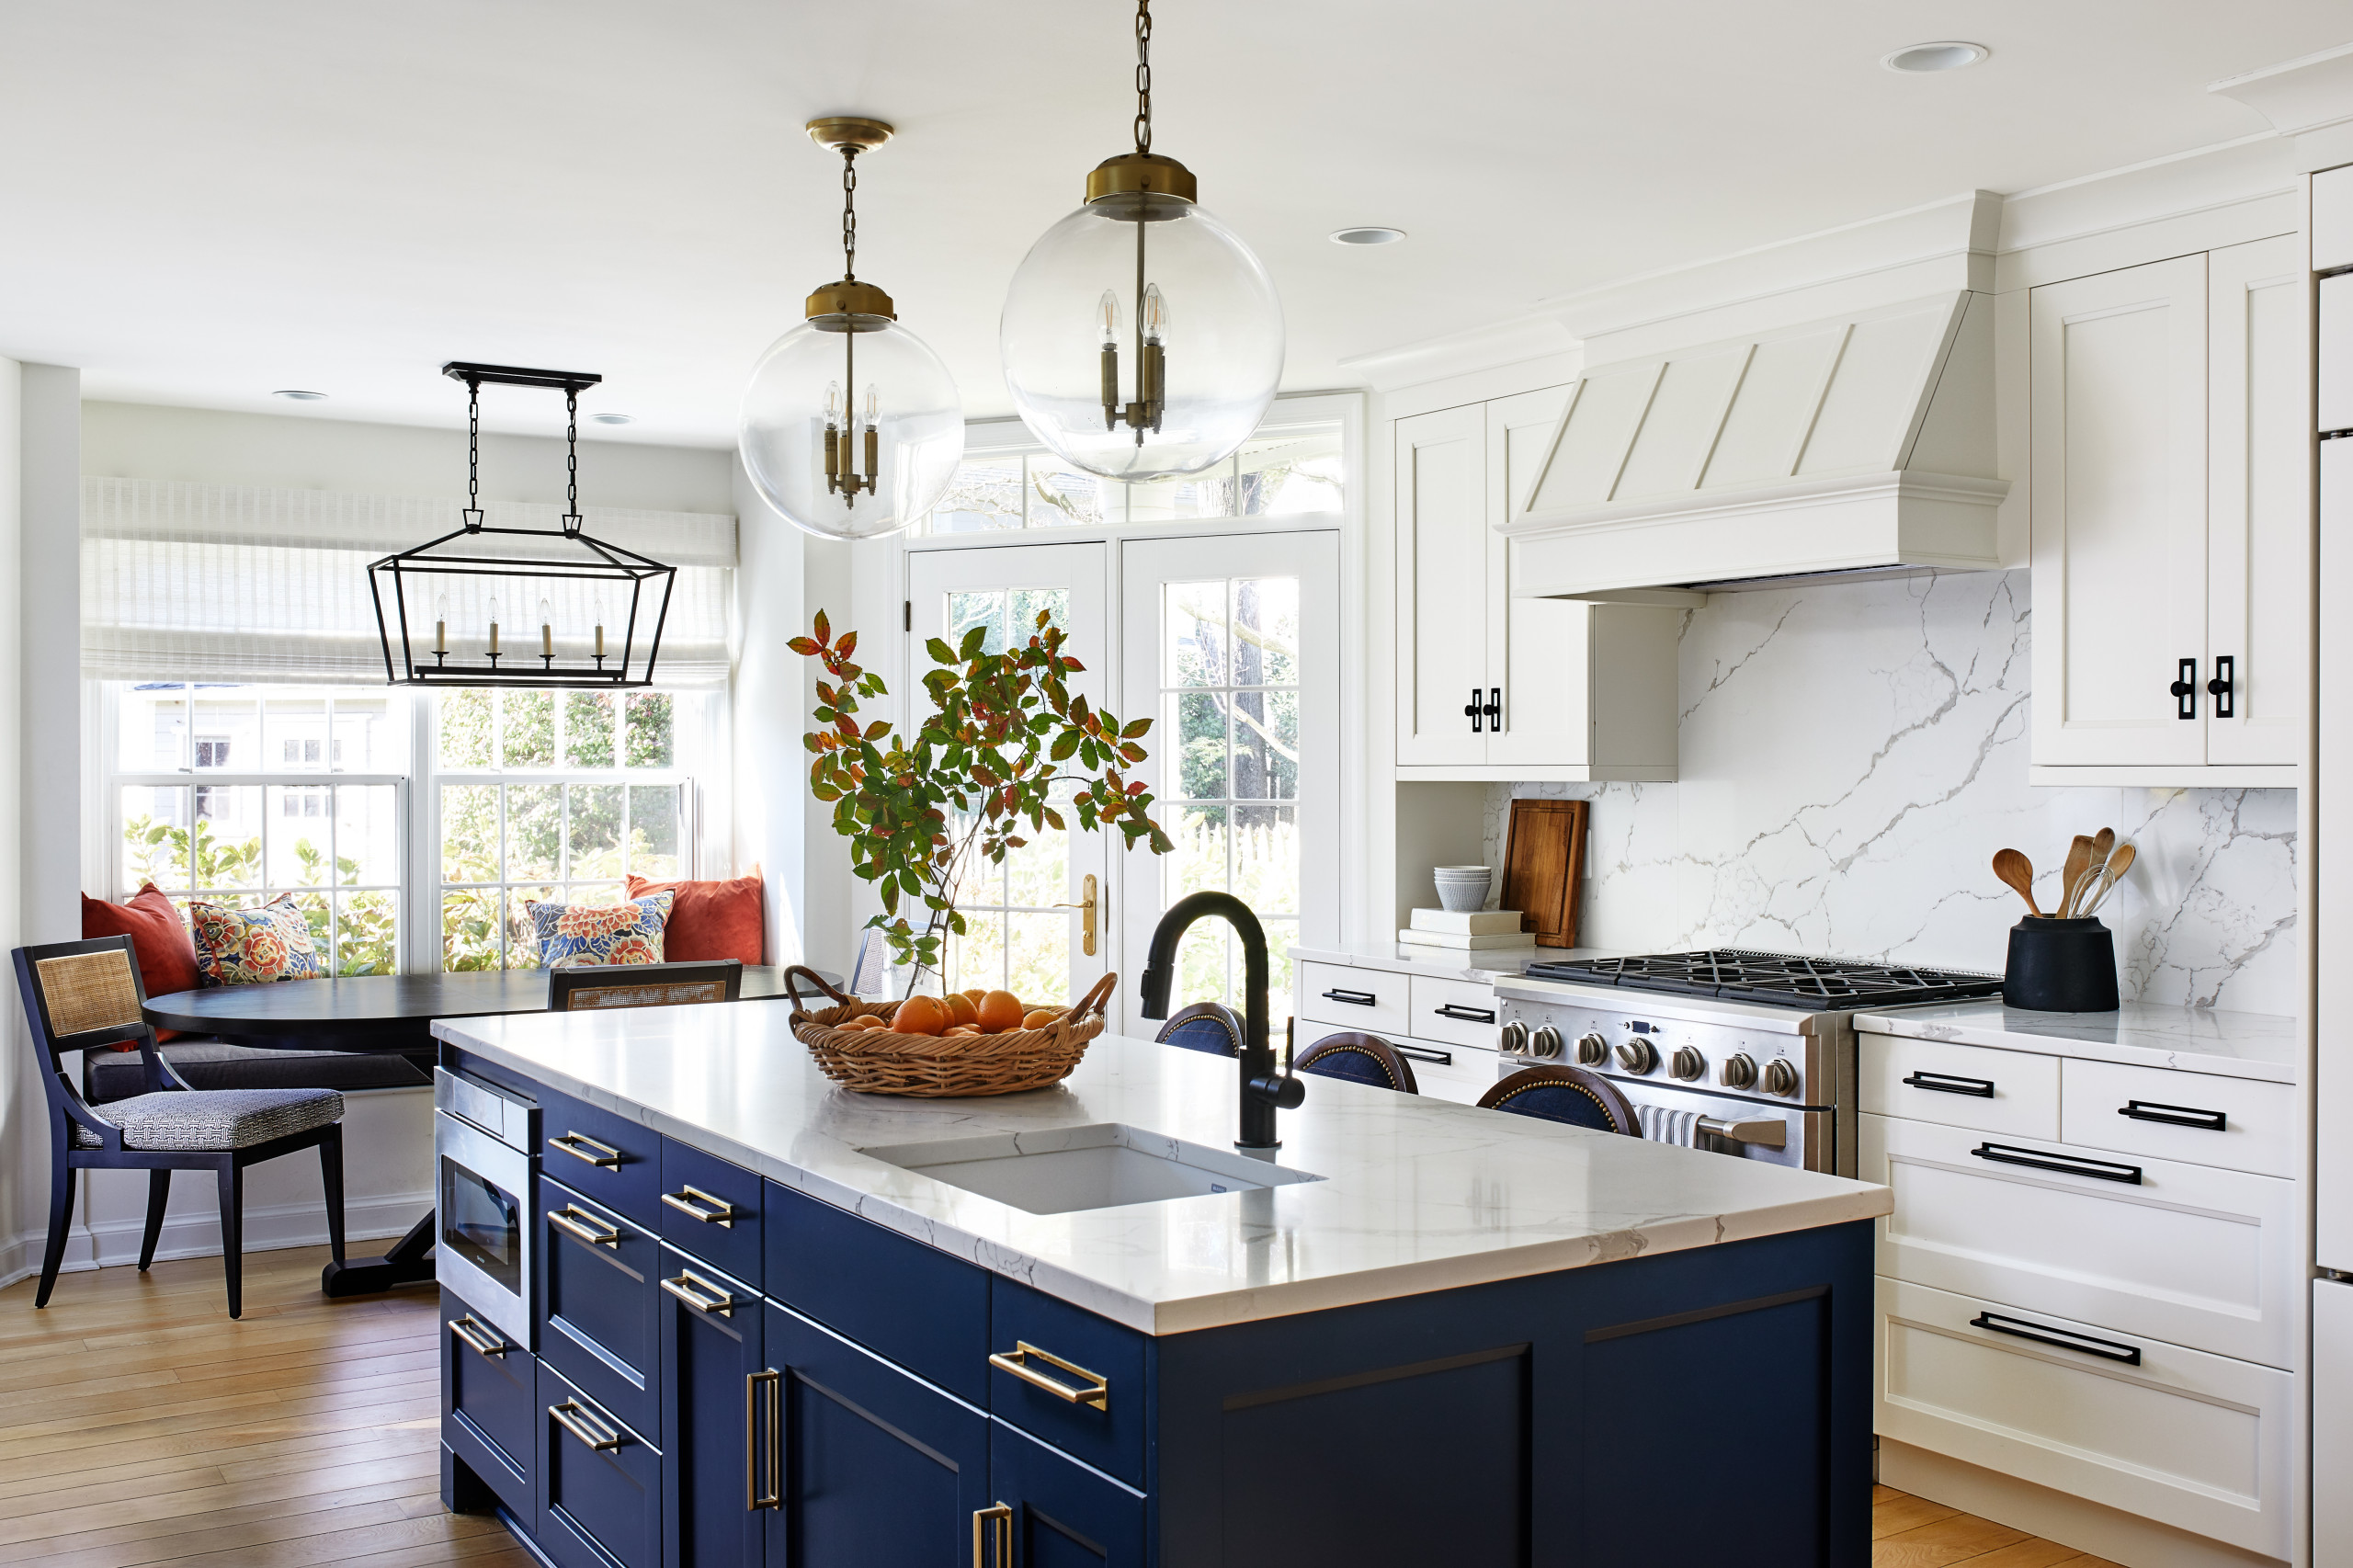 20 Traditional White Kitchen Ideas You'll Love   September, 20 ...